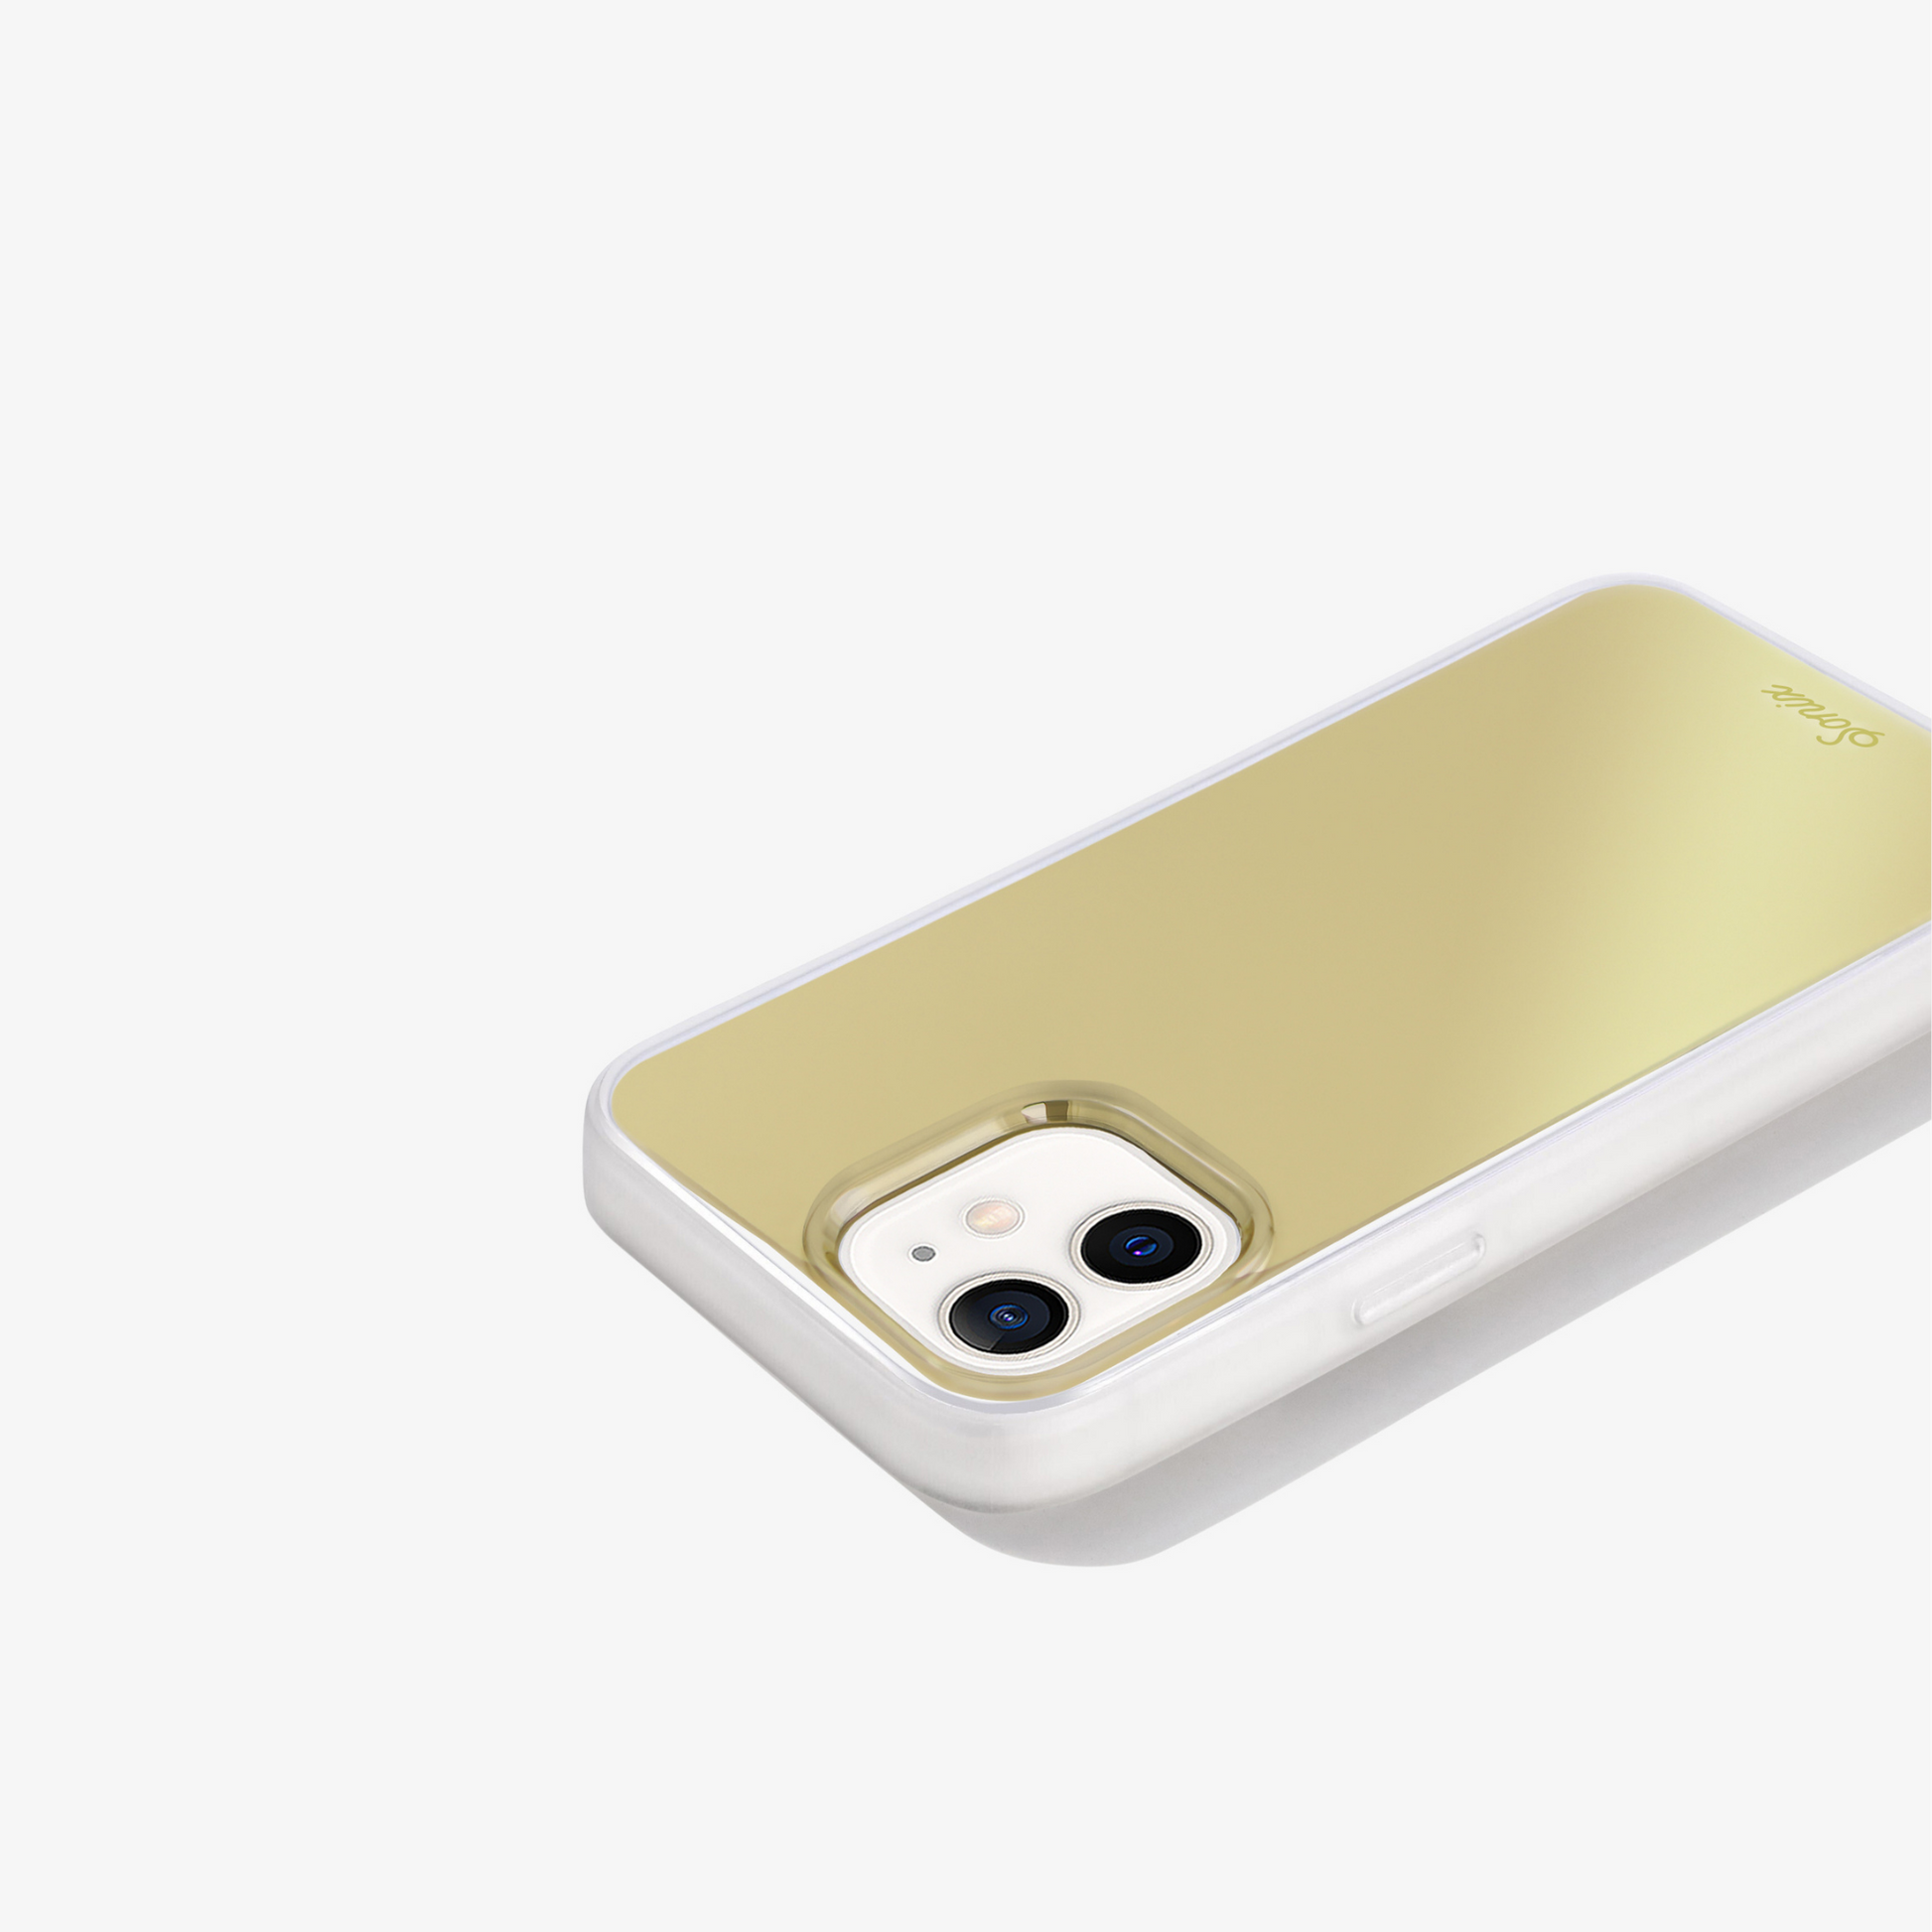 a metallic gold design shown on an iphone 12 mini side view